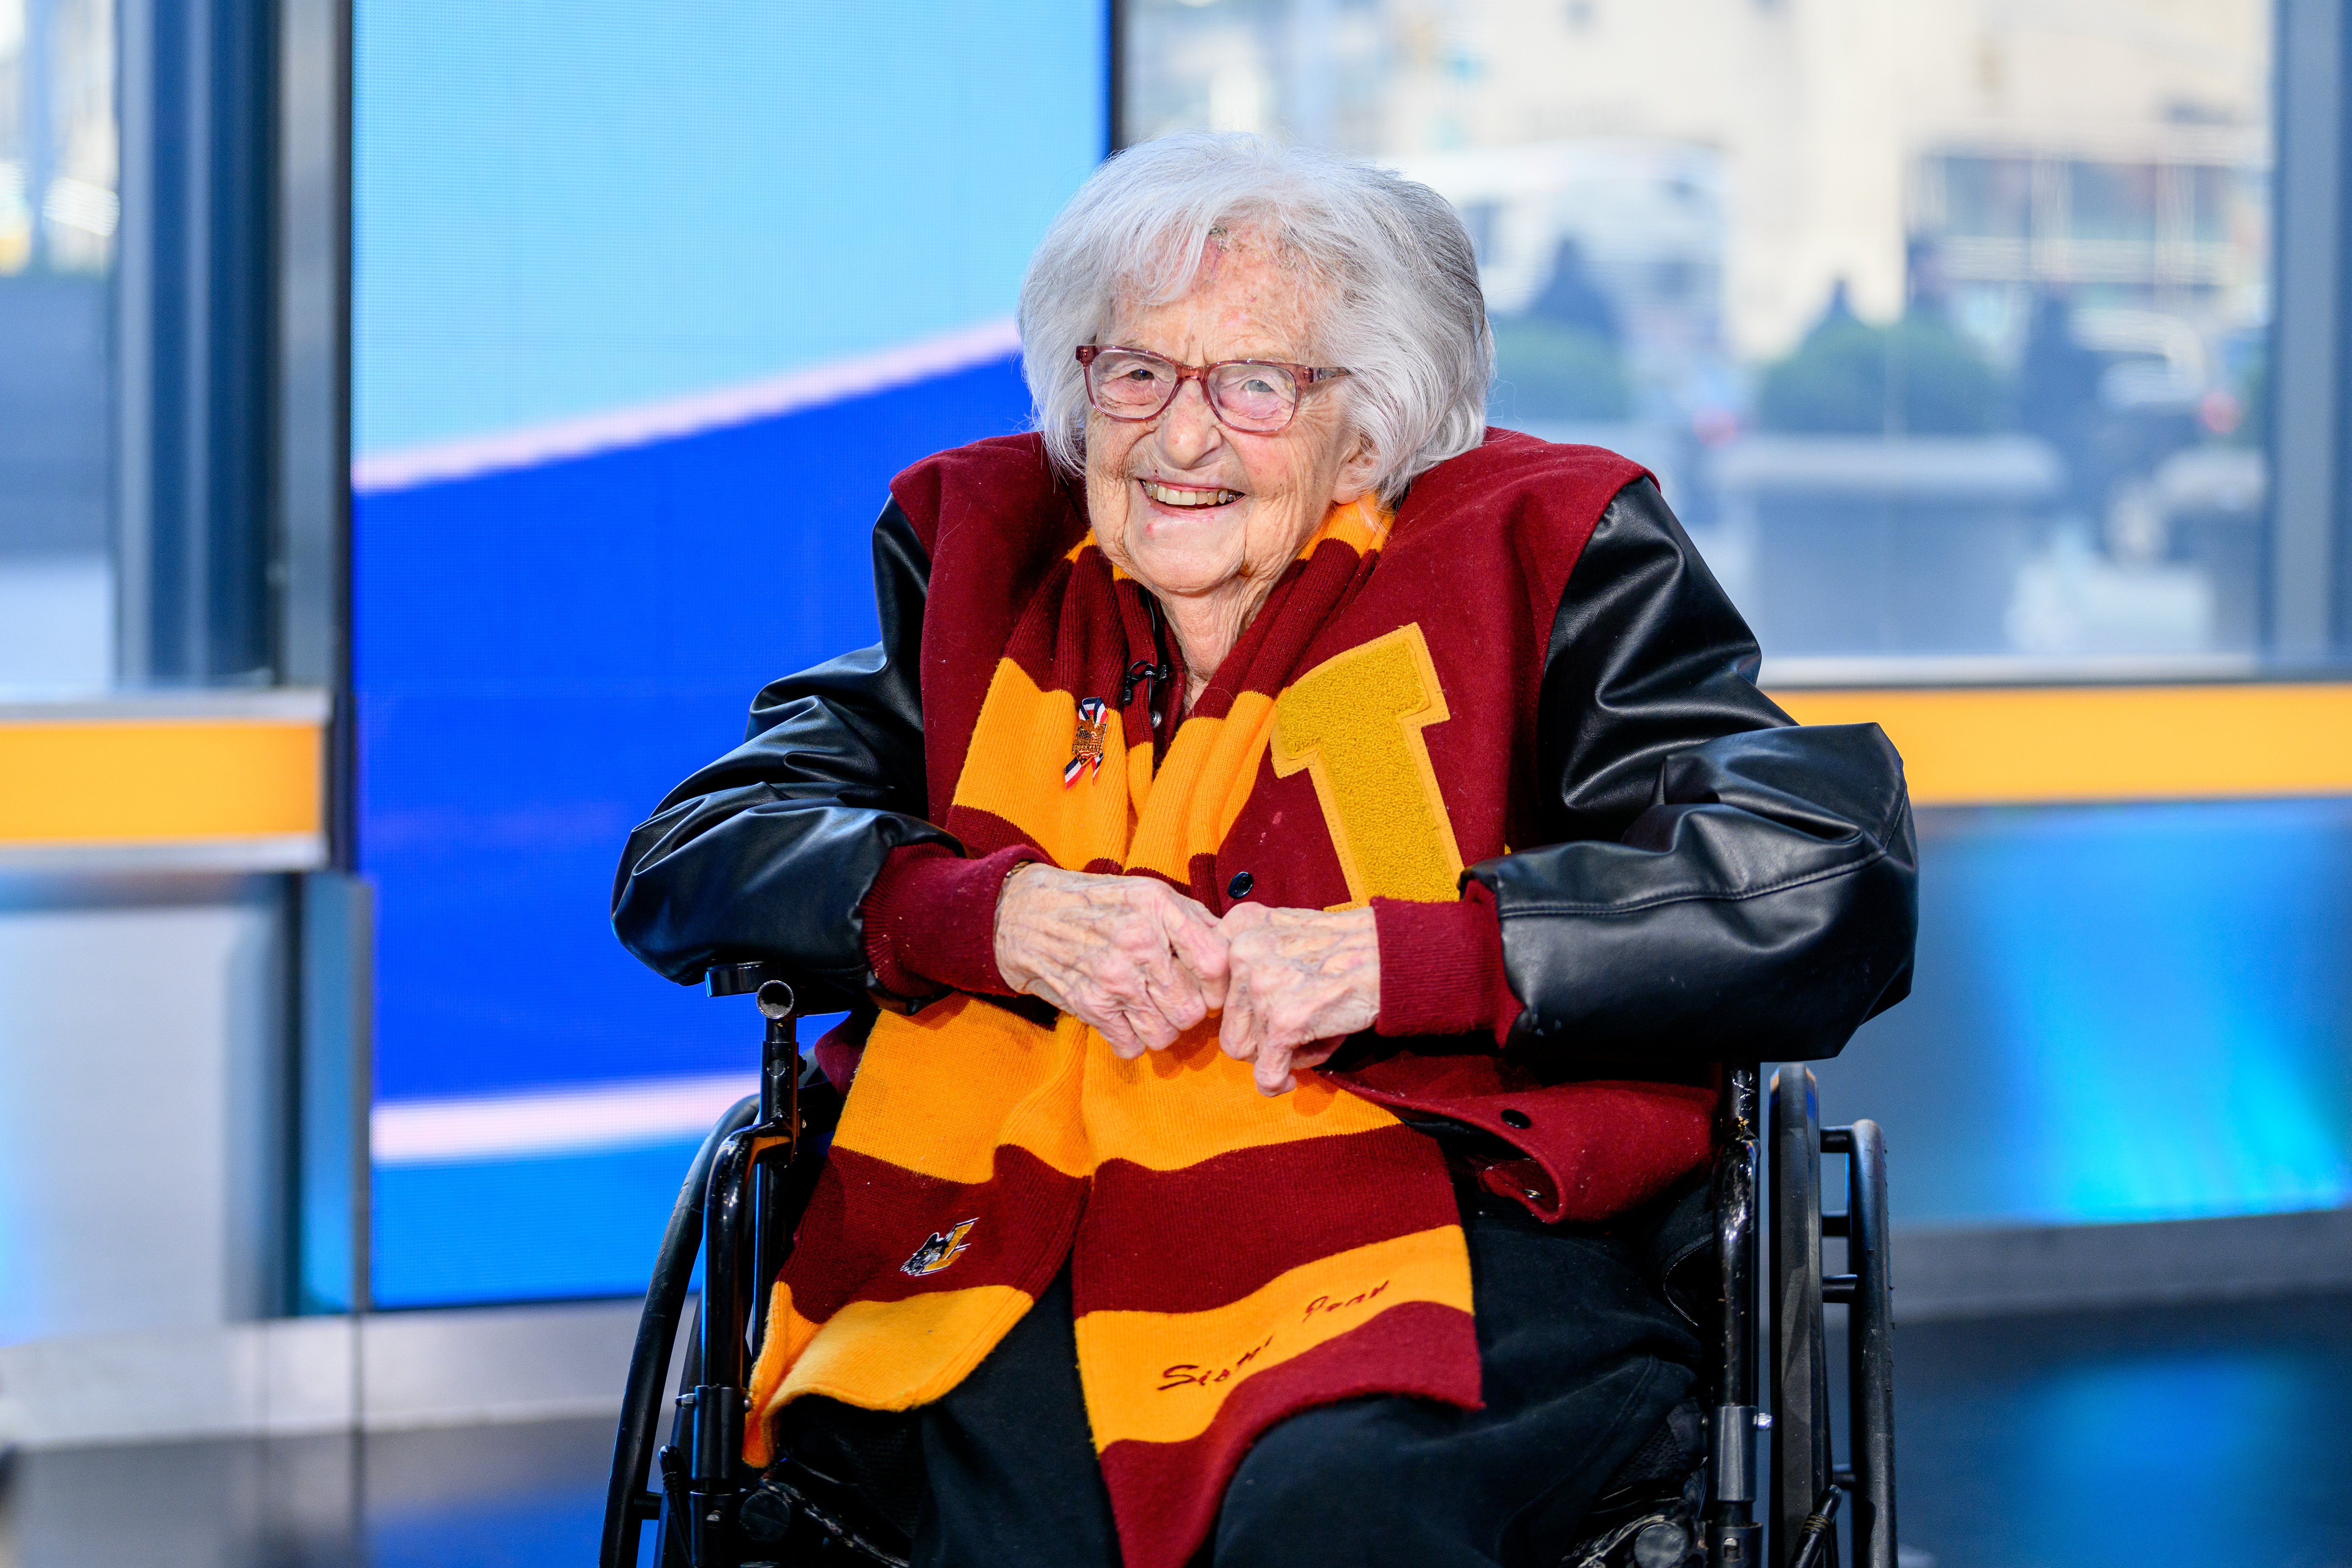 Sister Jean throws out first pitch for Cubs